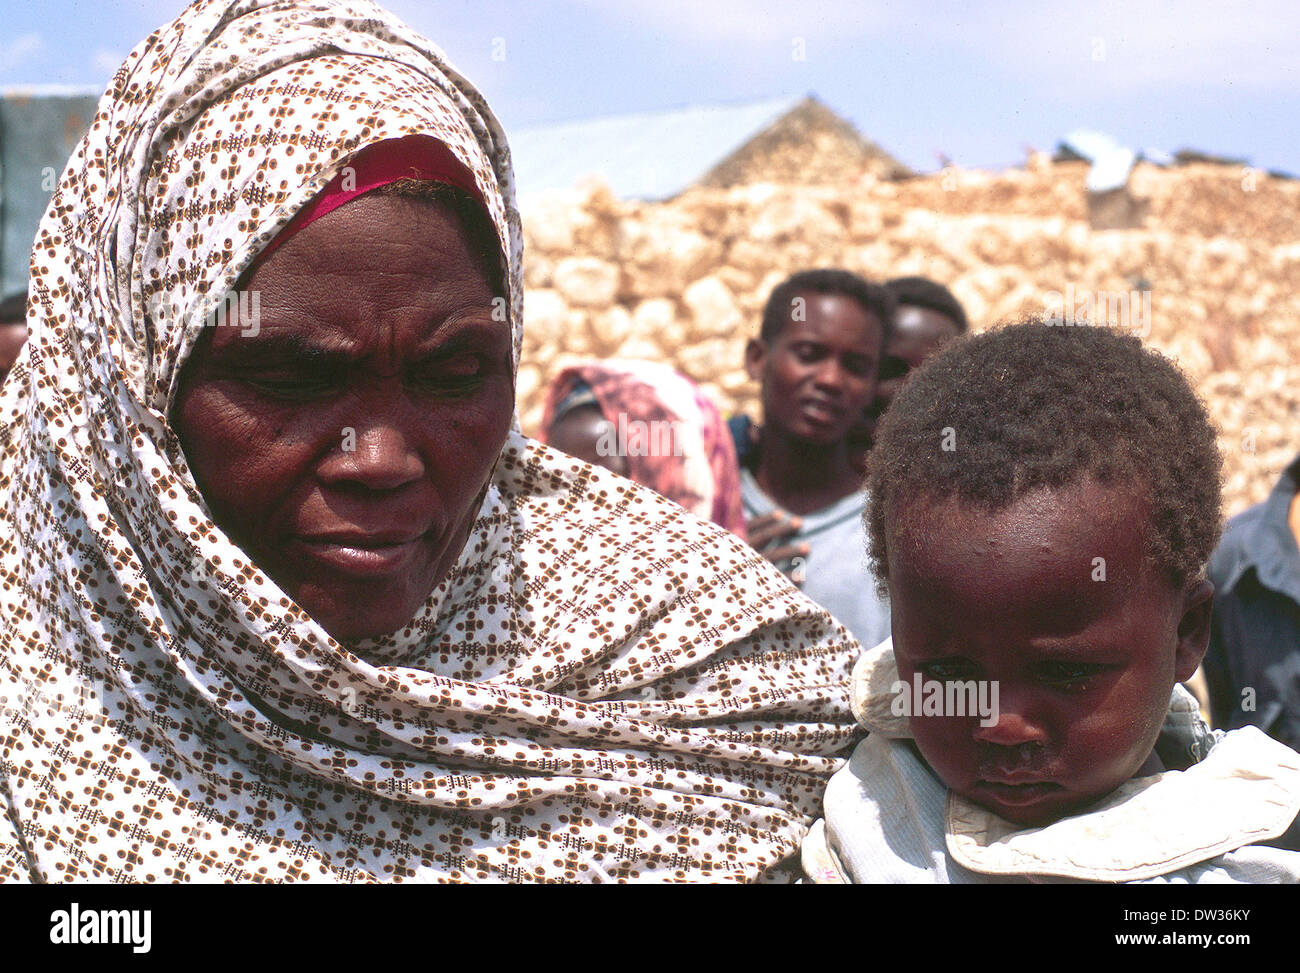 Bantu woman with child in displaced camp on outskirts of Galkayo Somalia Stock Photo